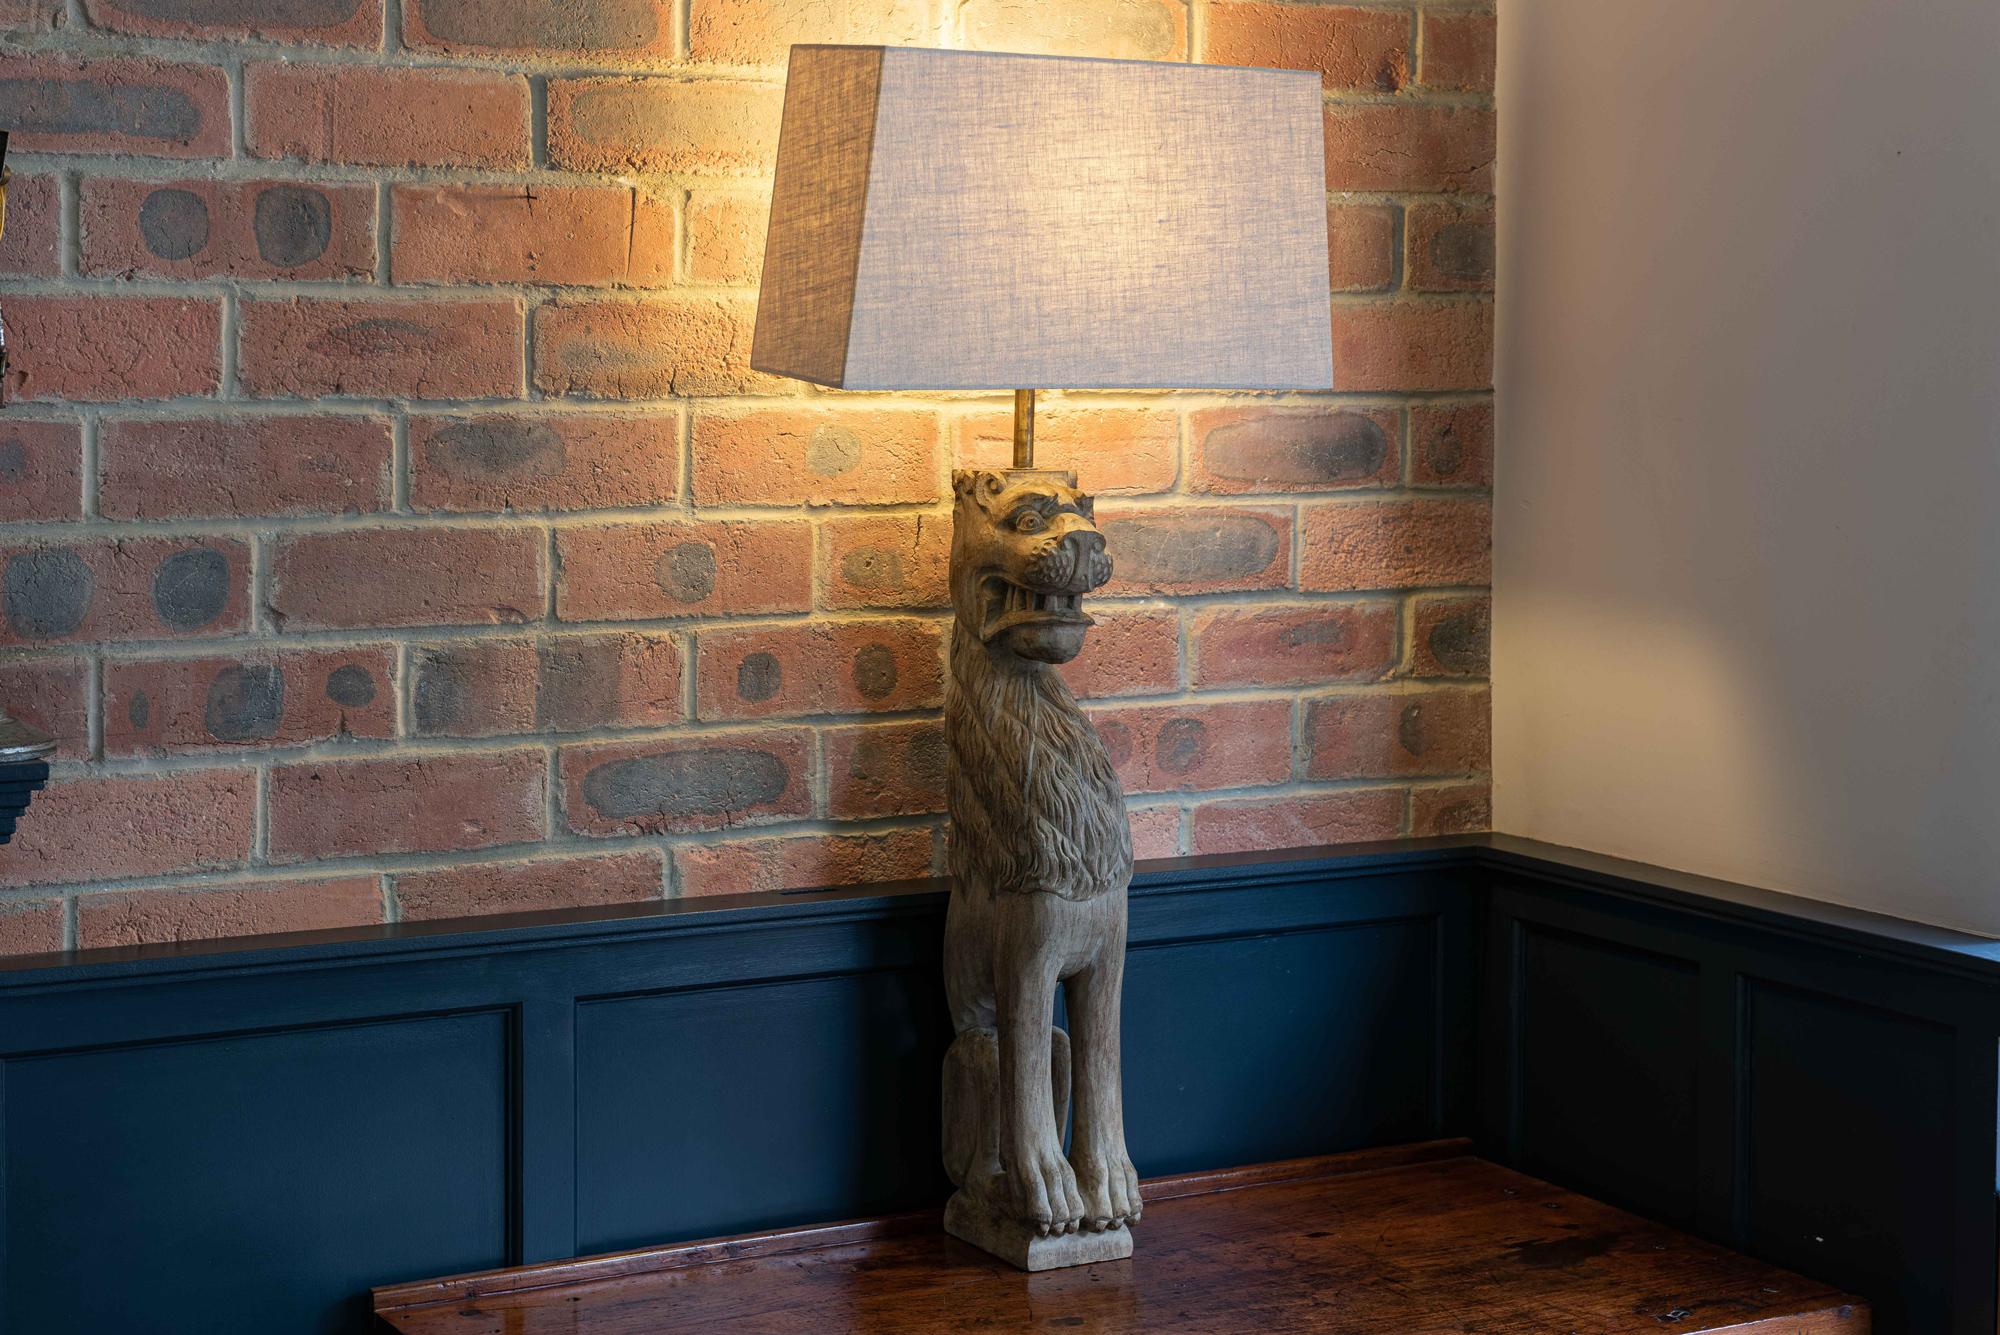 18th century English large carved oak lion table lamp
circa 1760.

Reclaimed from a church Pew end, bleached and adapted.
OKA Linen shade included.

Rewired and pat tested

Measures: H 75 x 15 W x 10 D cm

With shade 92 H x 45 W x 15 D cm.